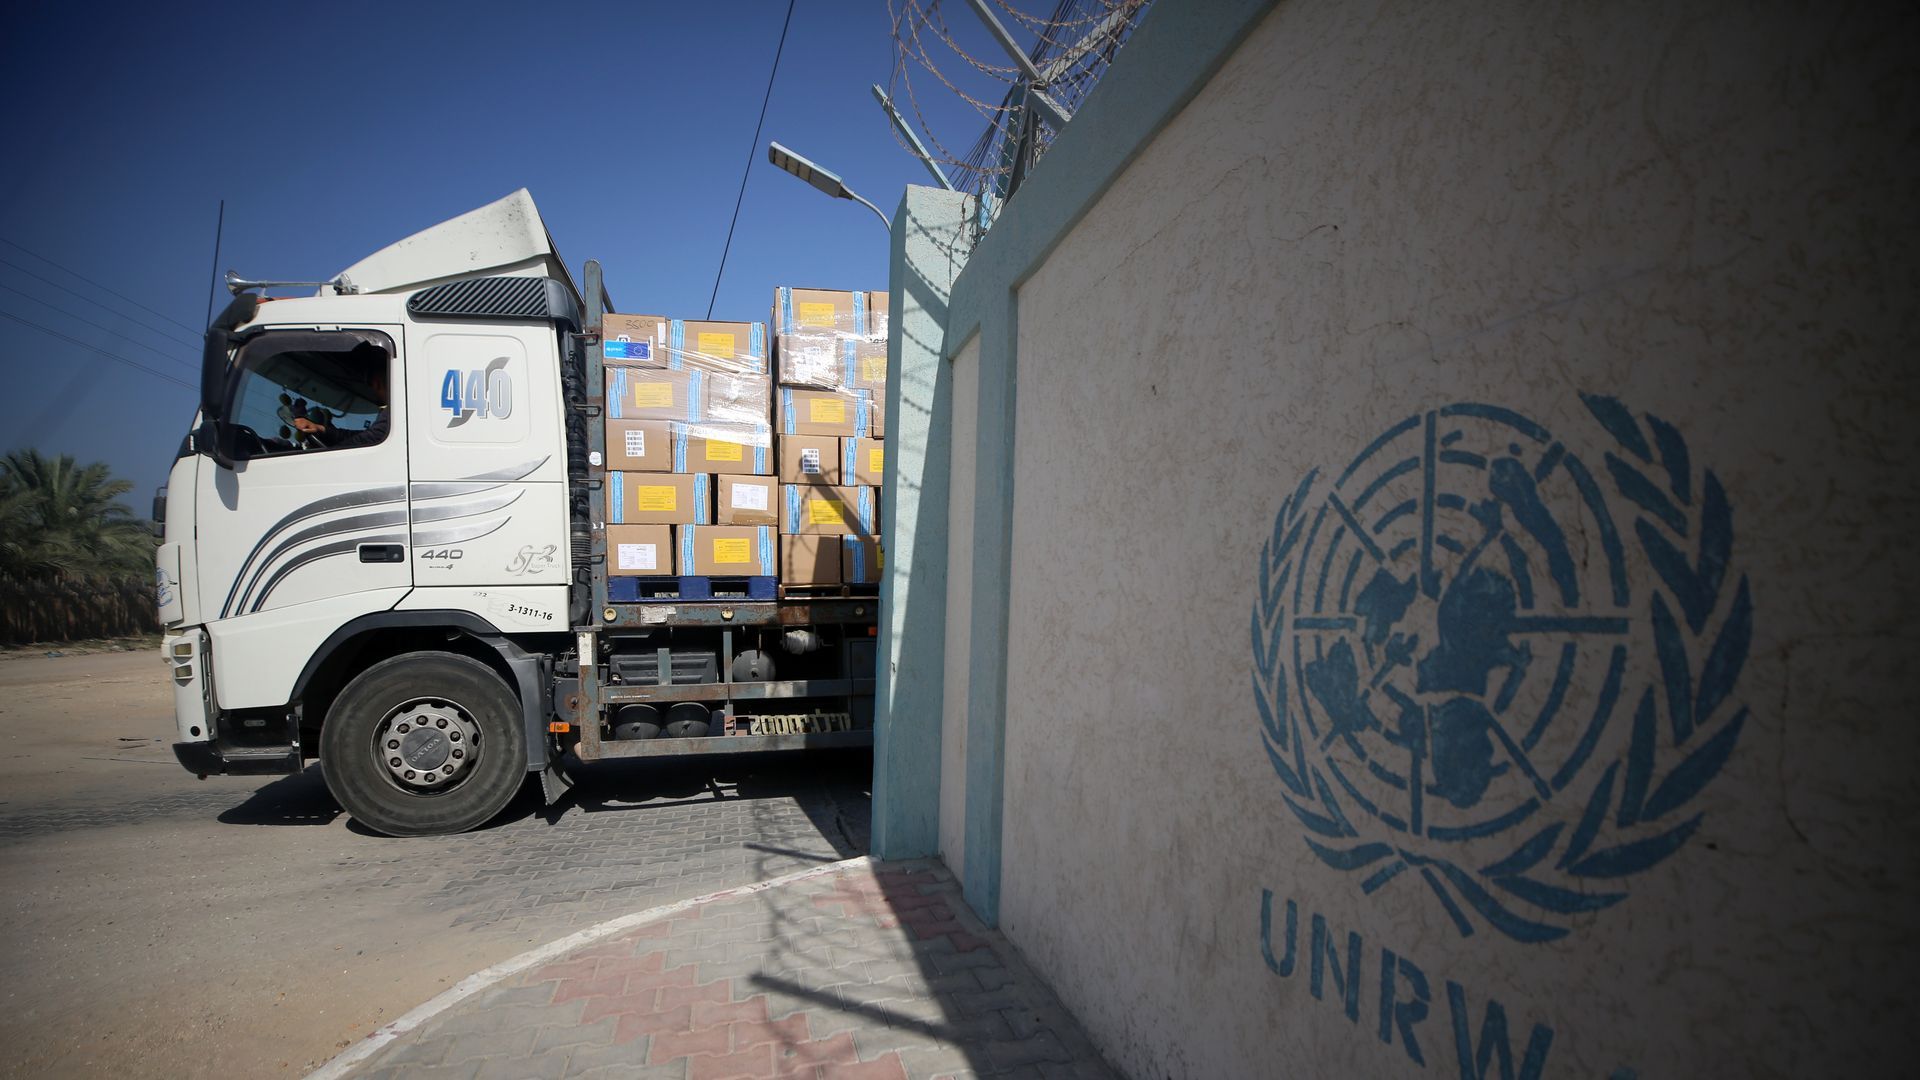 UNRWA workers pack the medical aid and prepare it for distribution to hospitals at a warehouse in Deir Al-Balah, Gaza. Photo: Majdi Fathi/NurPhoto via Getty Images